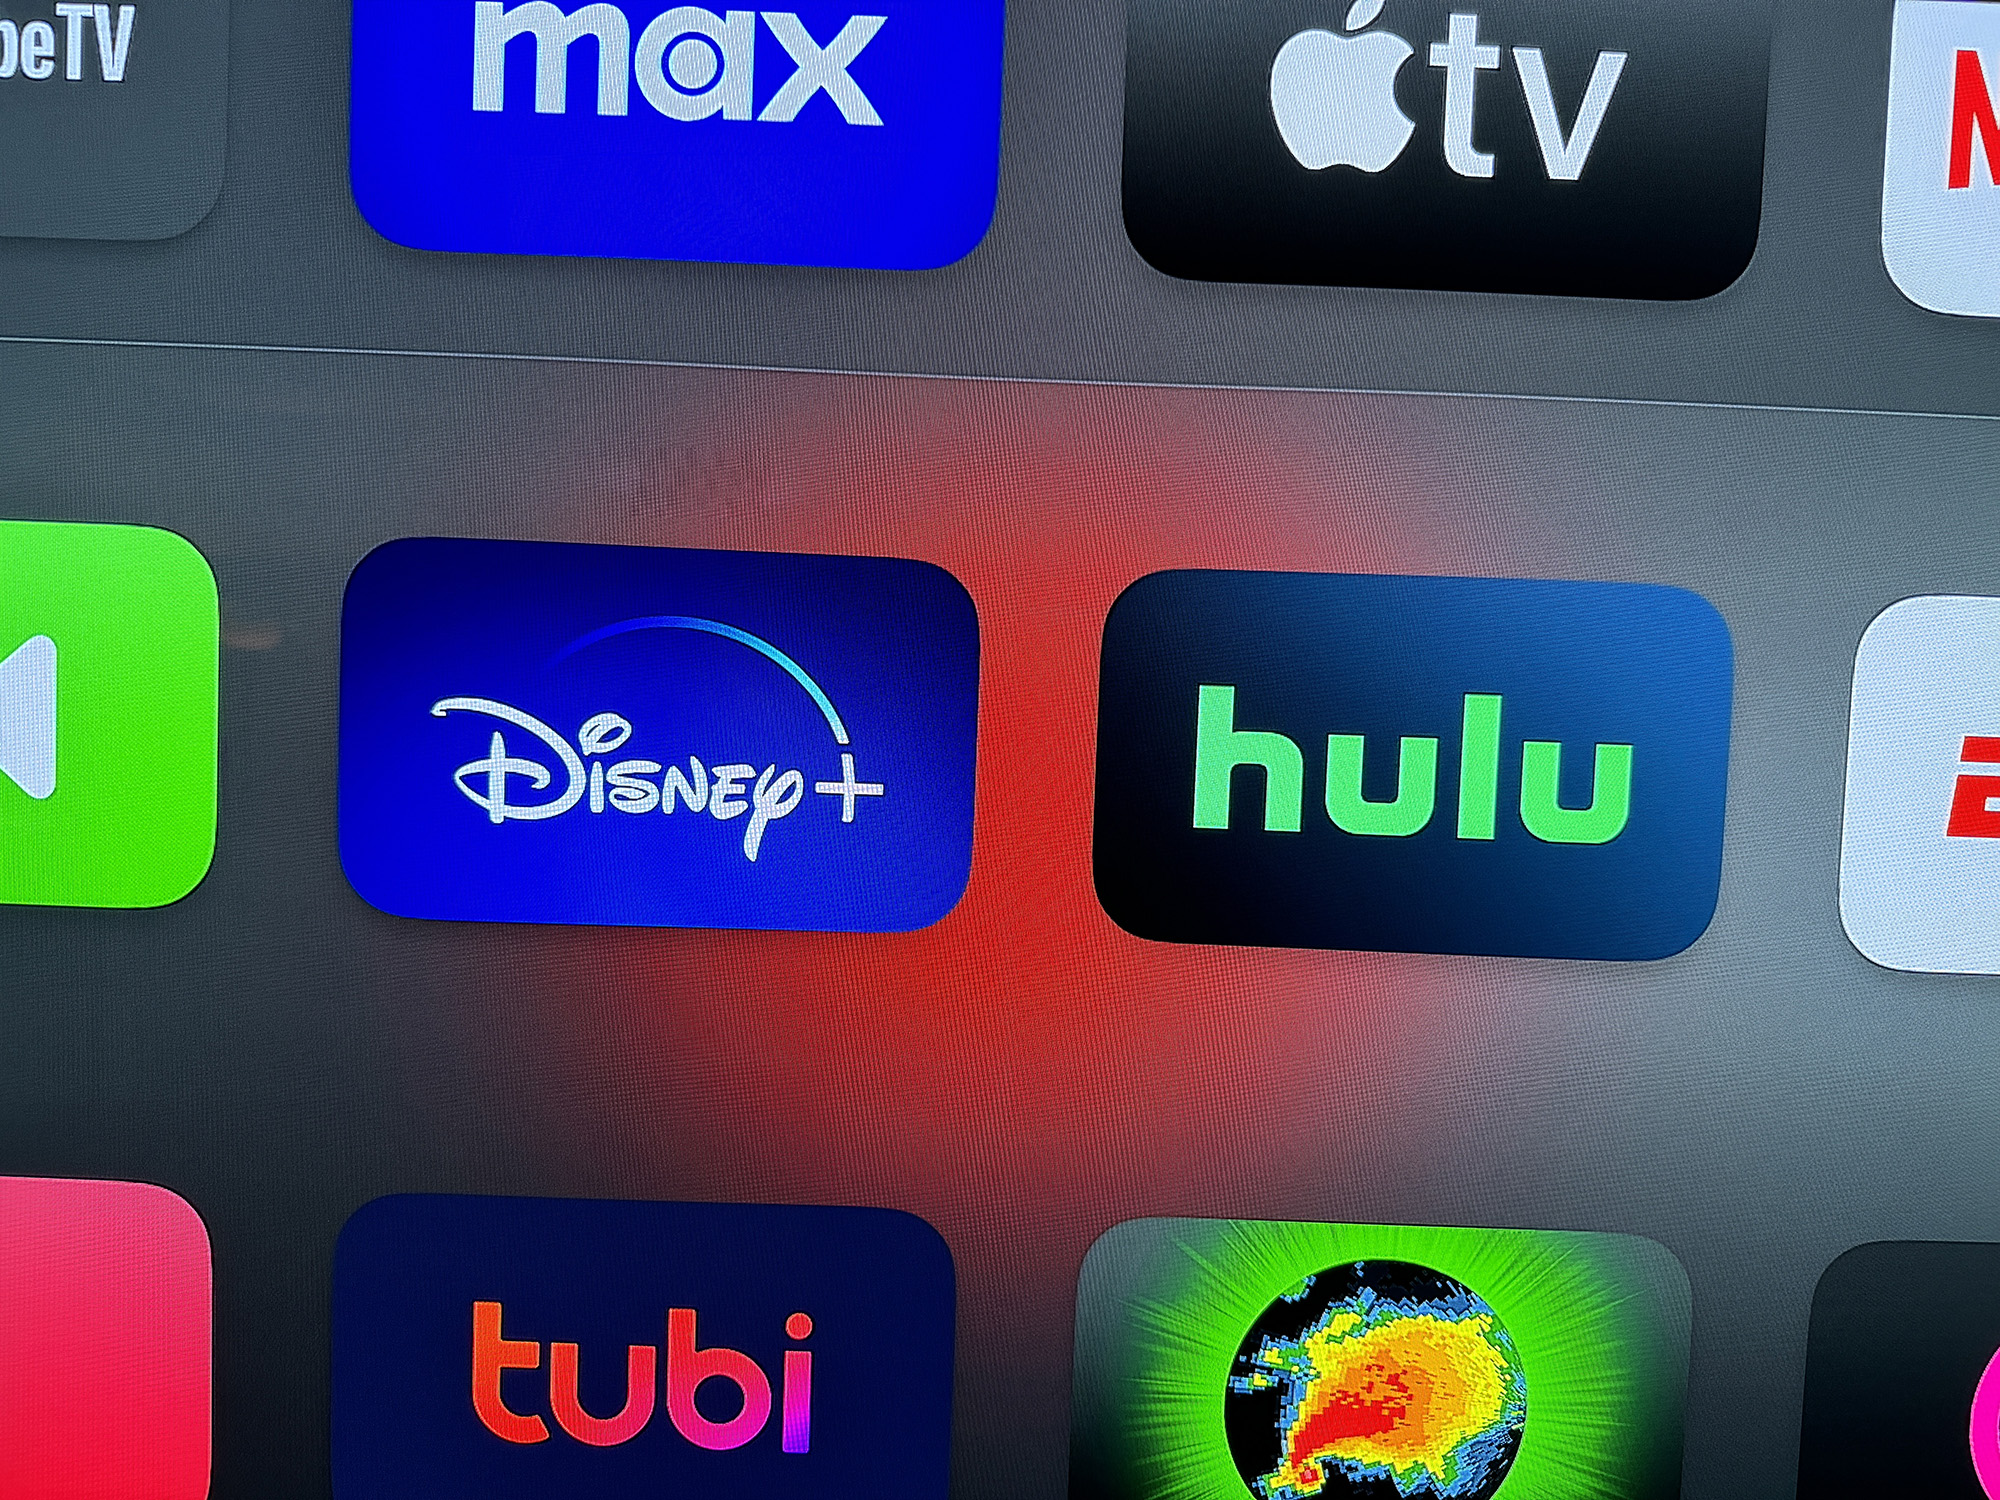 App icons for Hulu and Disney+ on Apple TV.